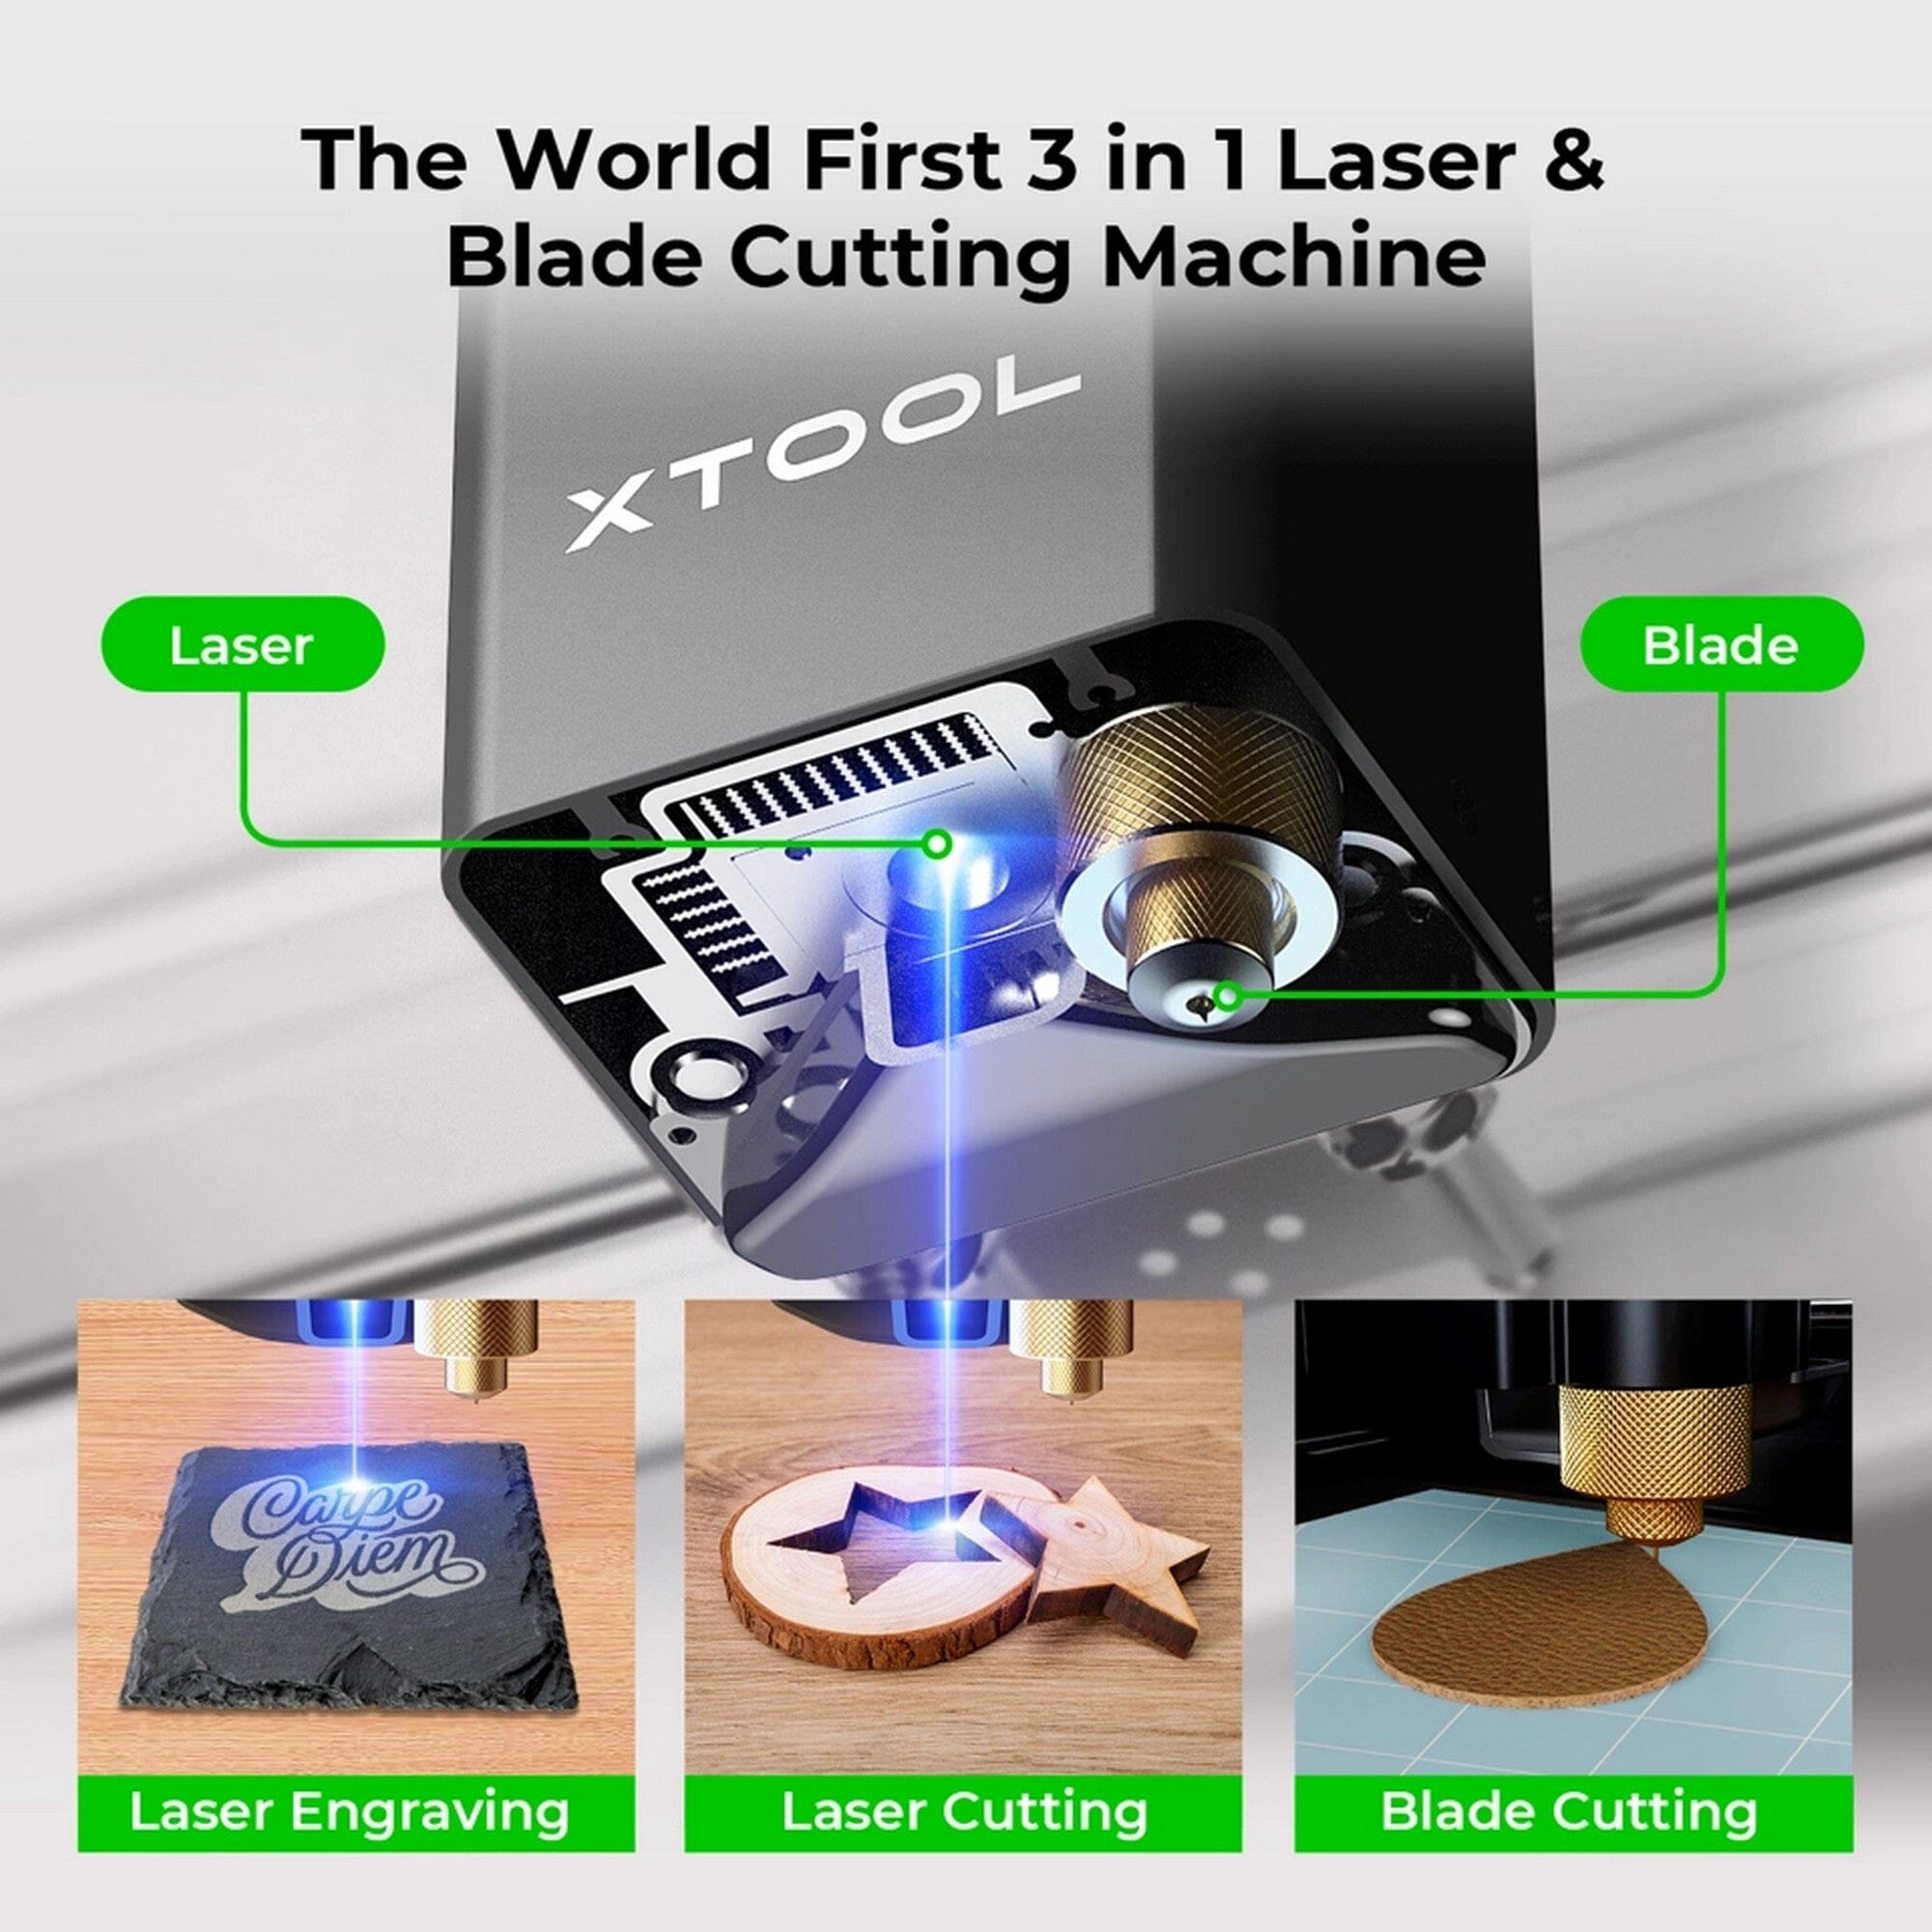 xTool M1-10w Engraver, Compact 3-in-1 Engraving Cutting Engraving